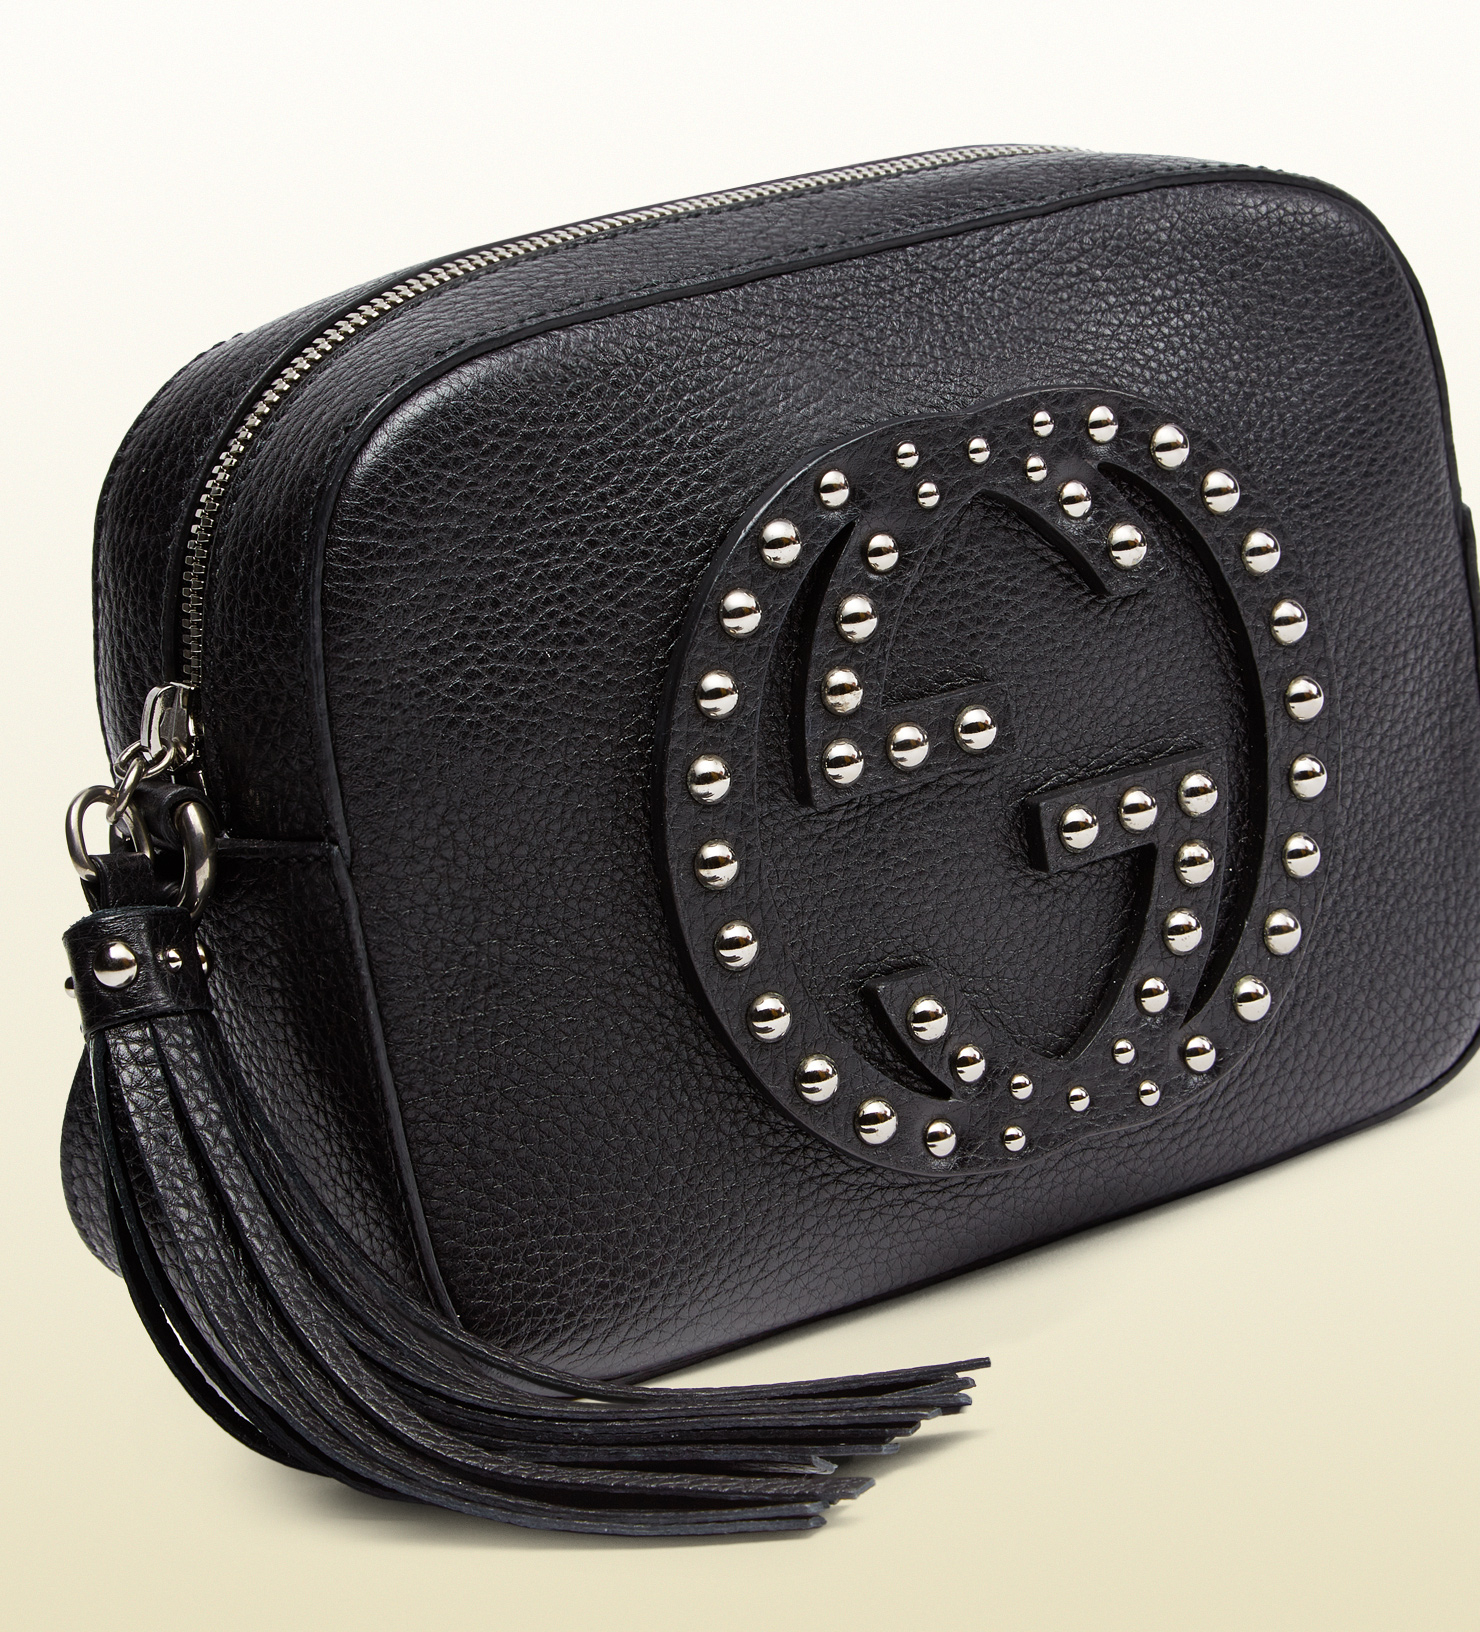 Gucci Soho Studded Leather Disco Bag in Natural (Black) - Lyst